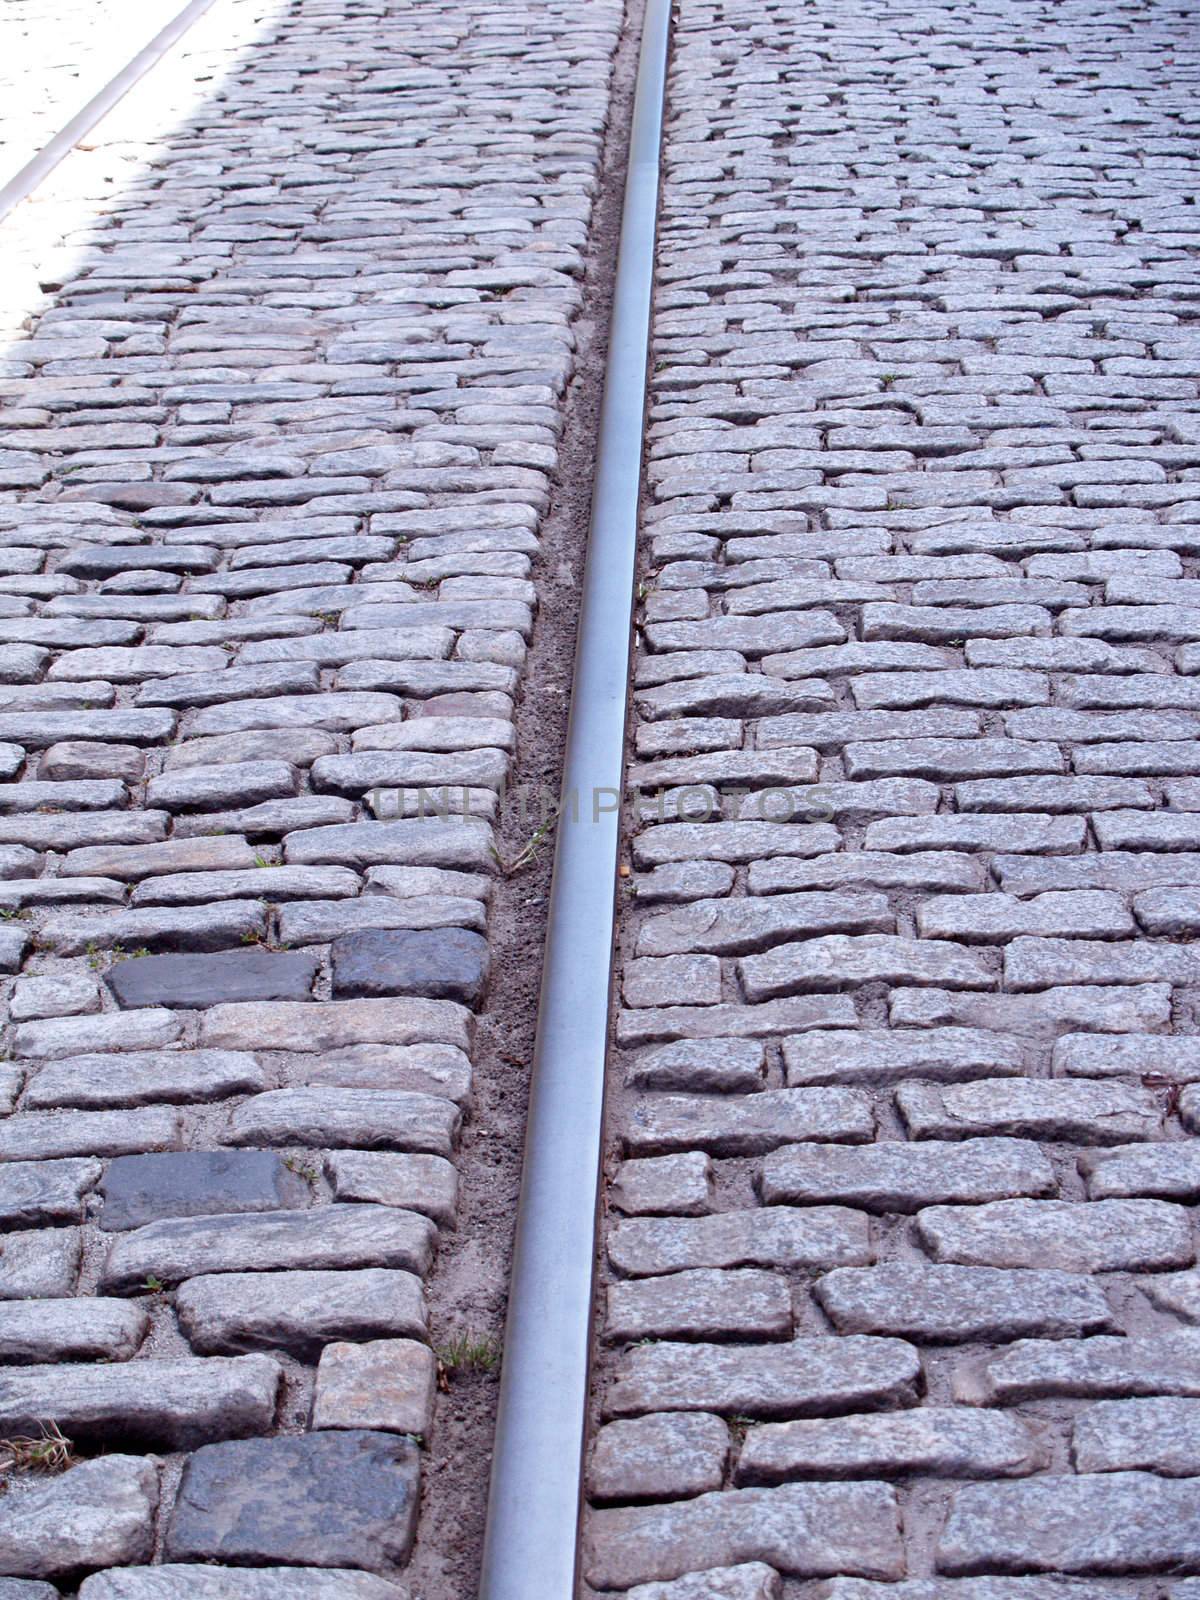 Closeup view of train tracks embedded in down the middle of an old cobblestone road.      